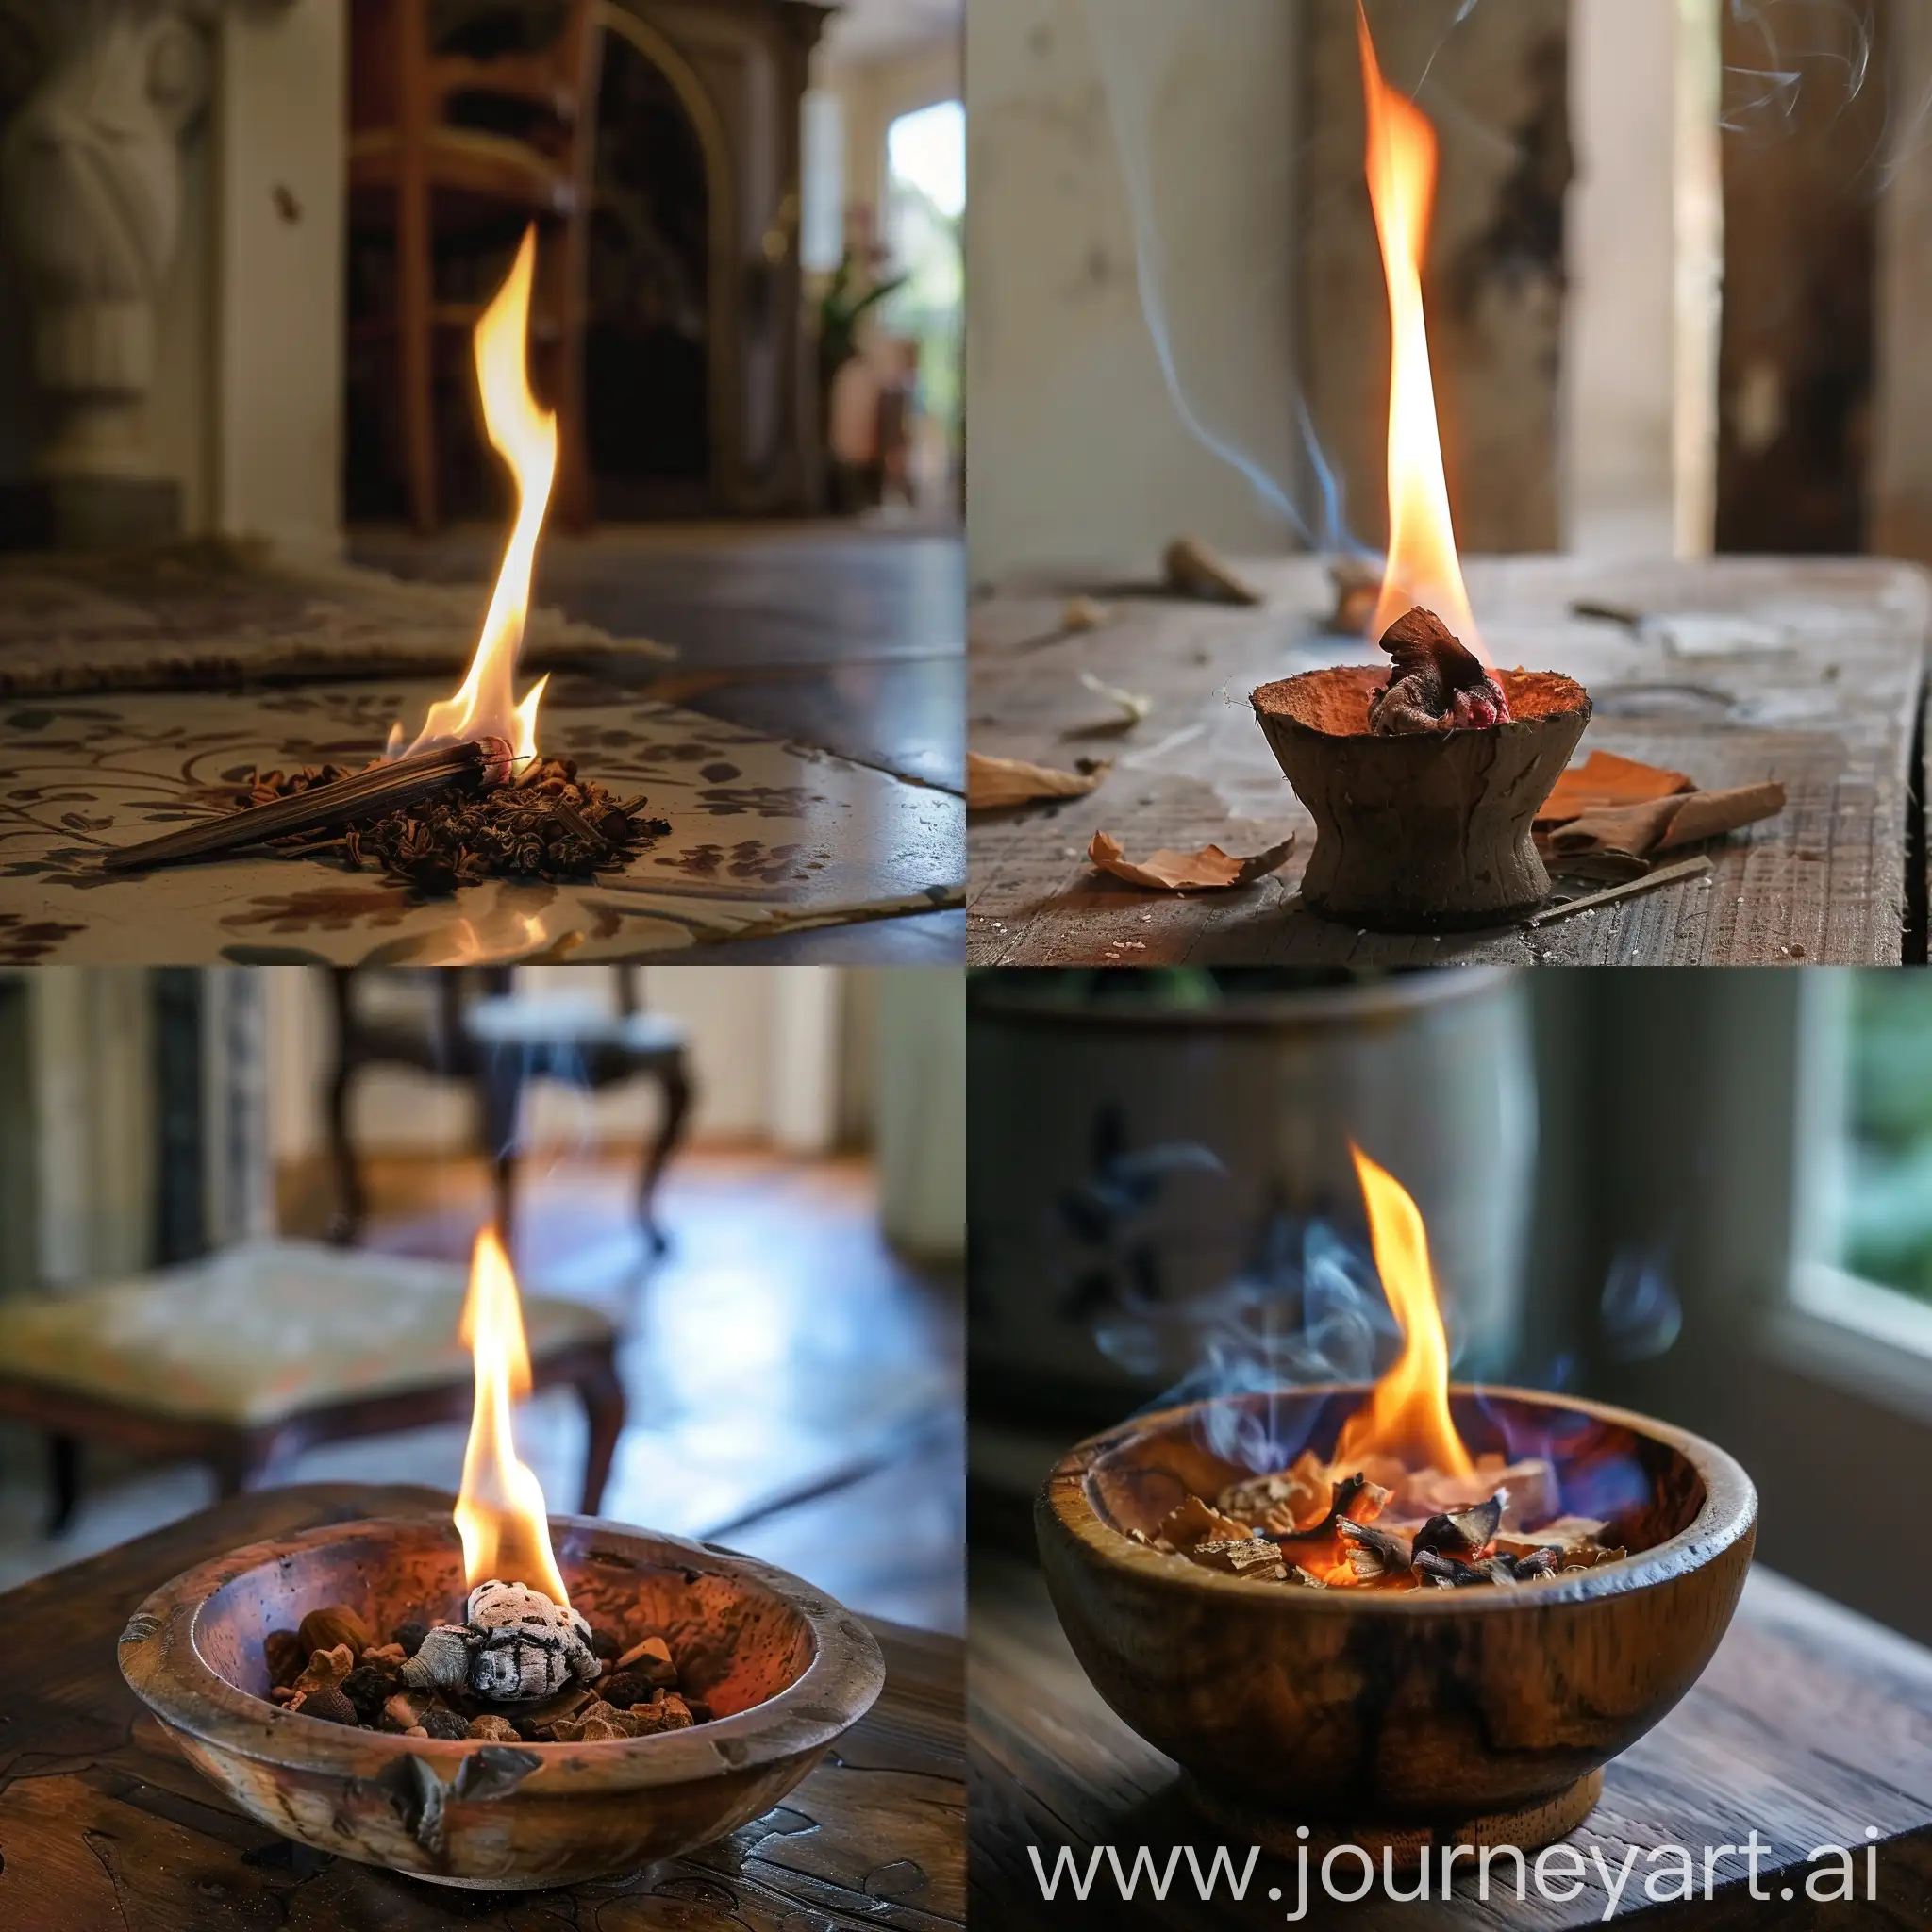 Burn Camphor in the hall of the home